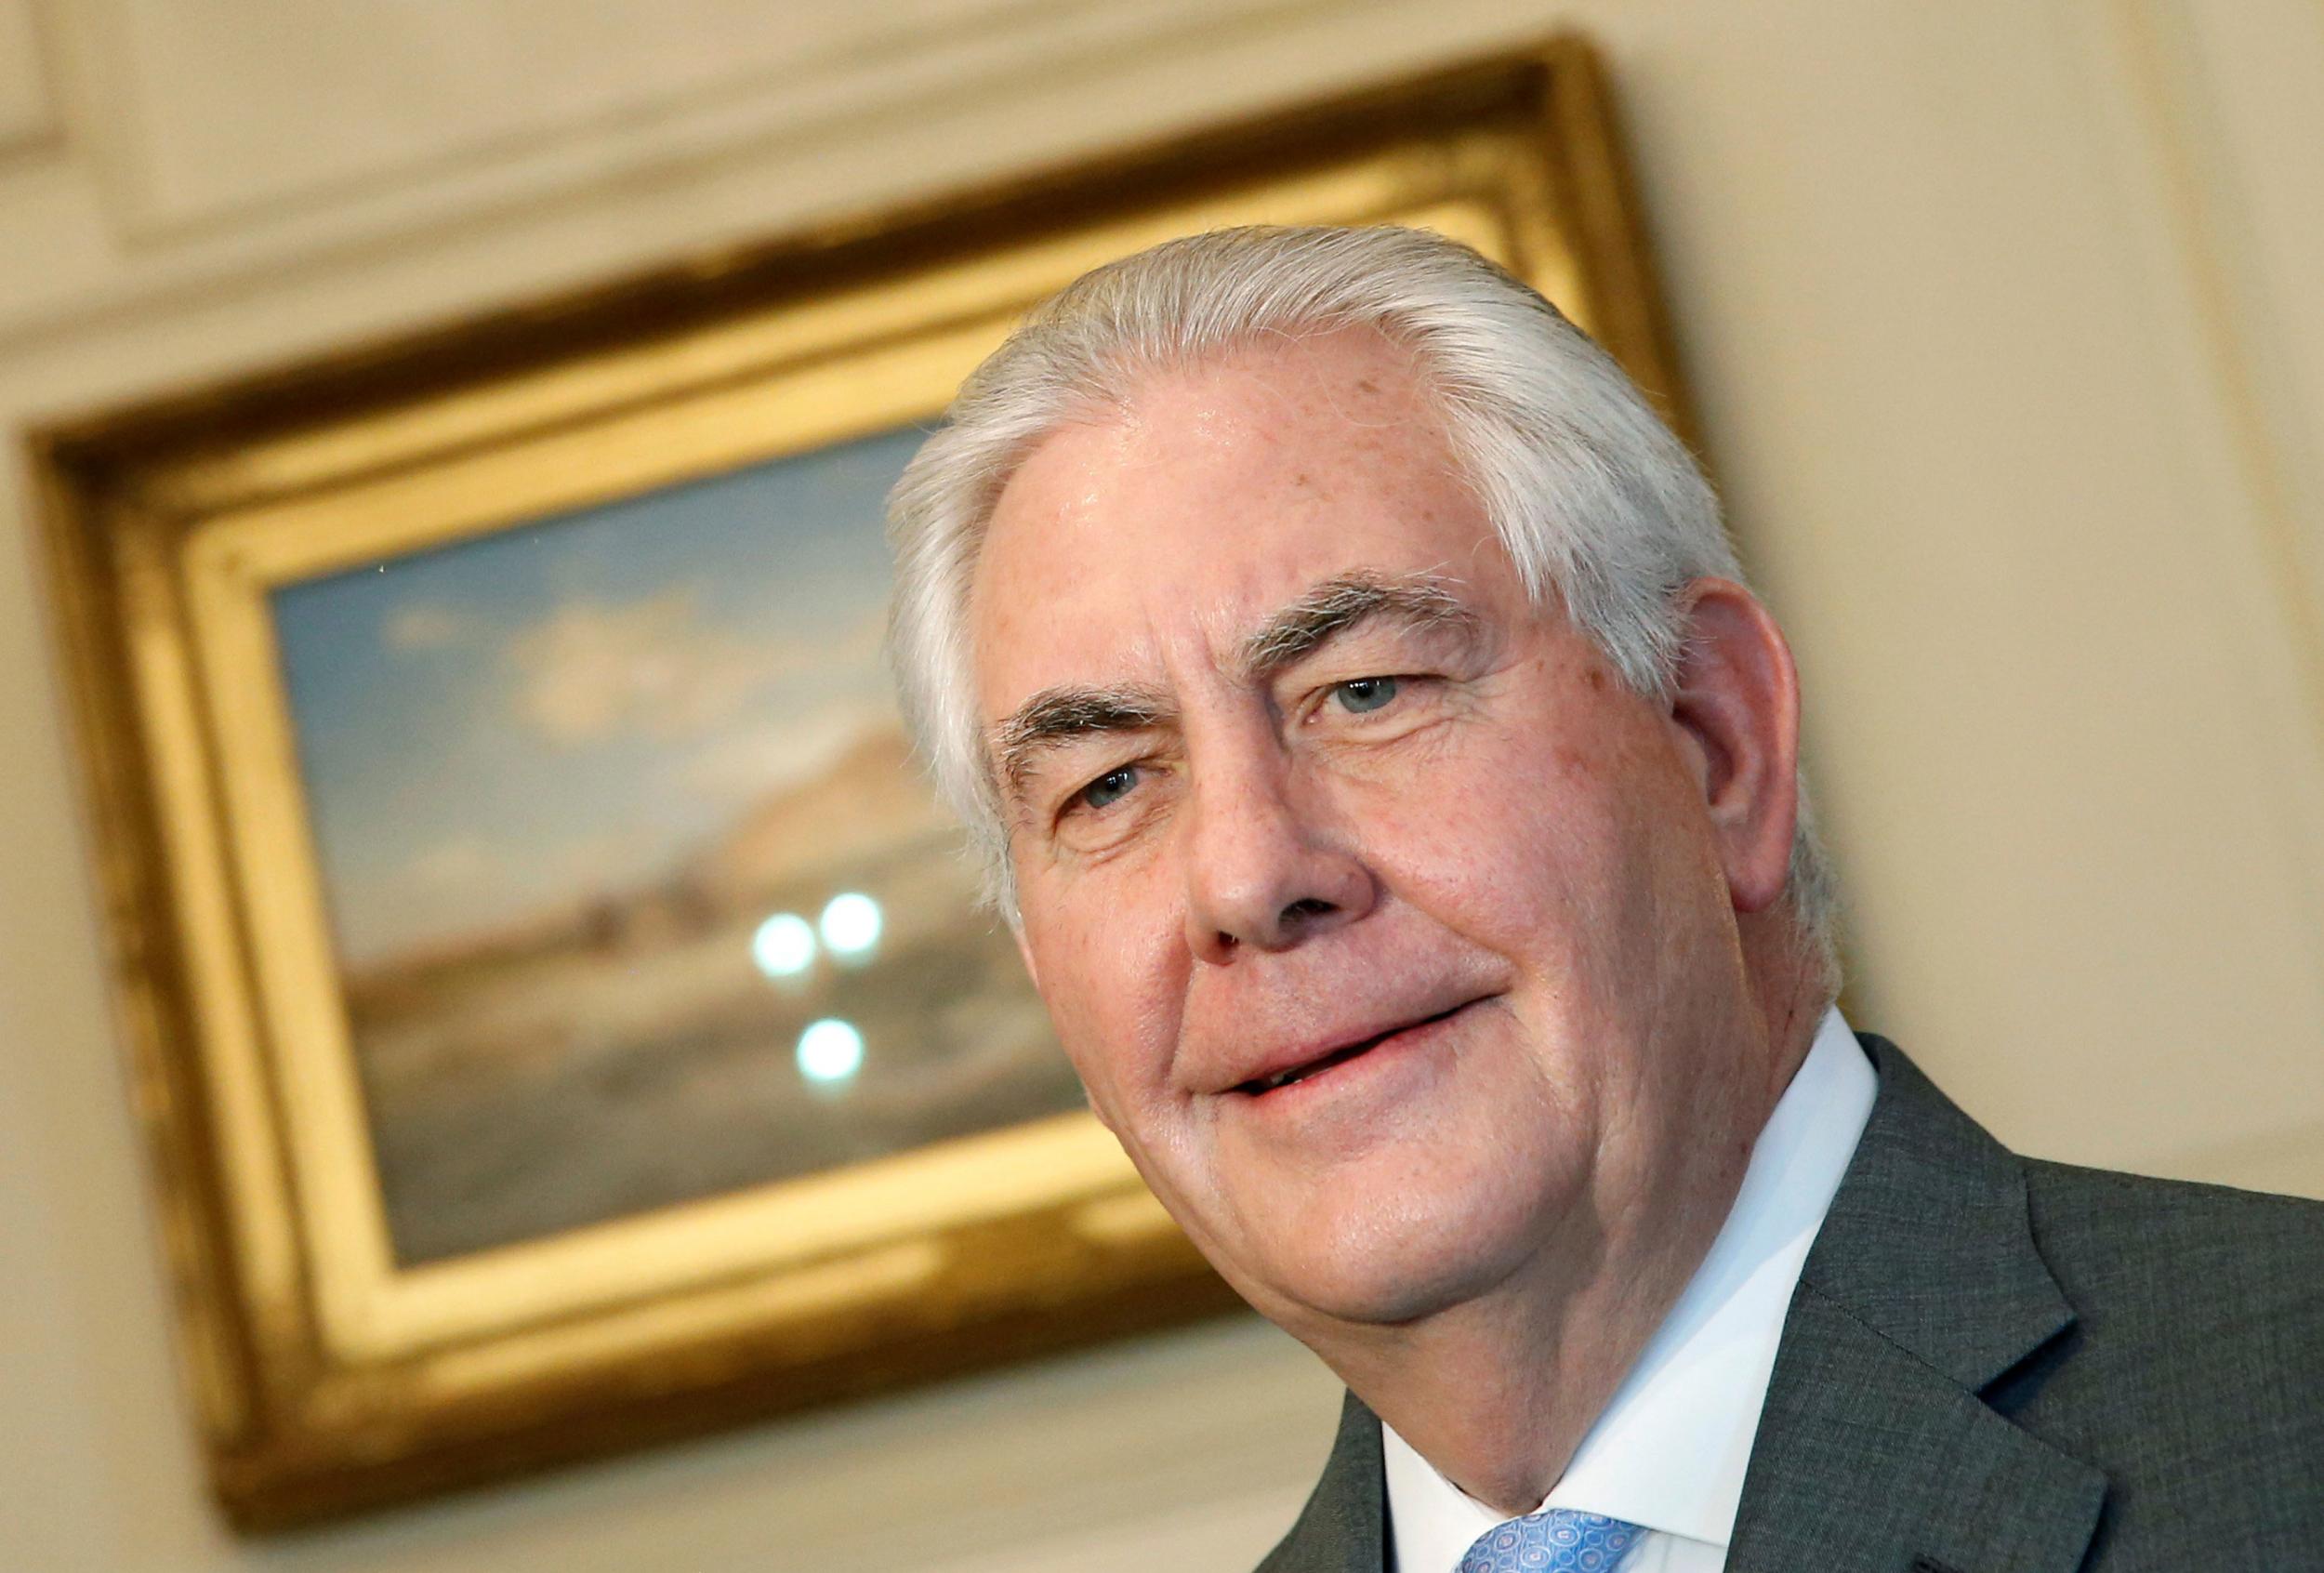 Secretary of State Rex Tillerson, who has recused himself from the Keystone XL project